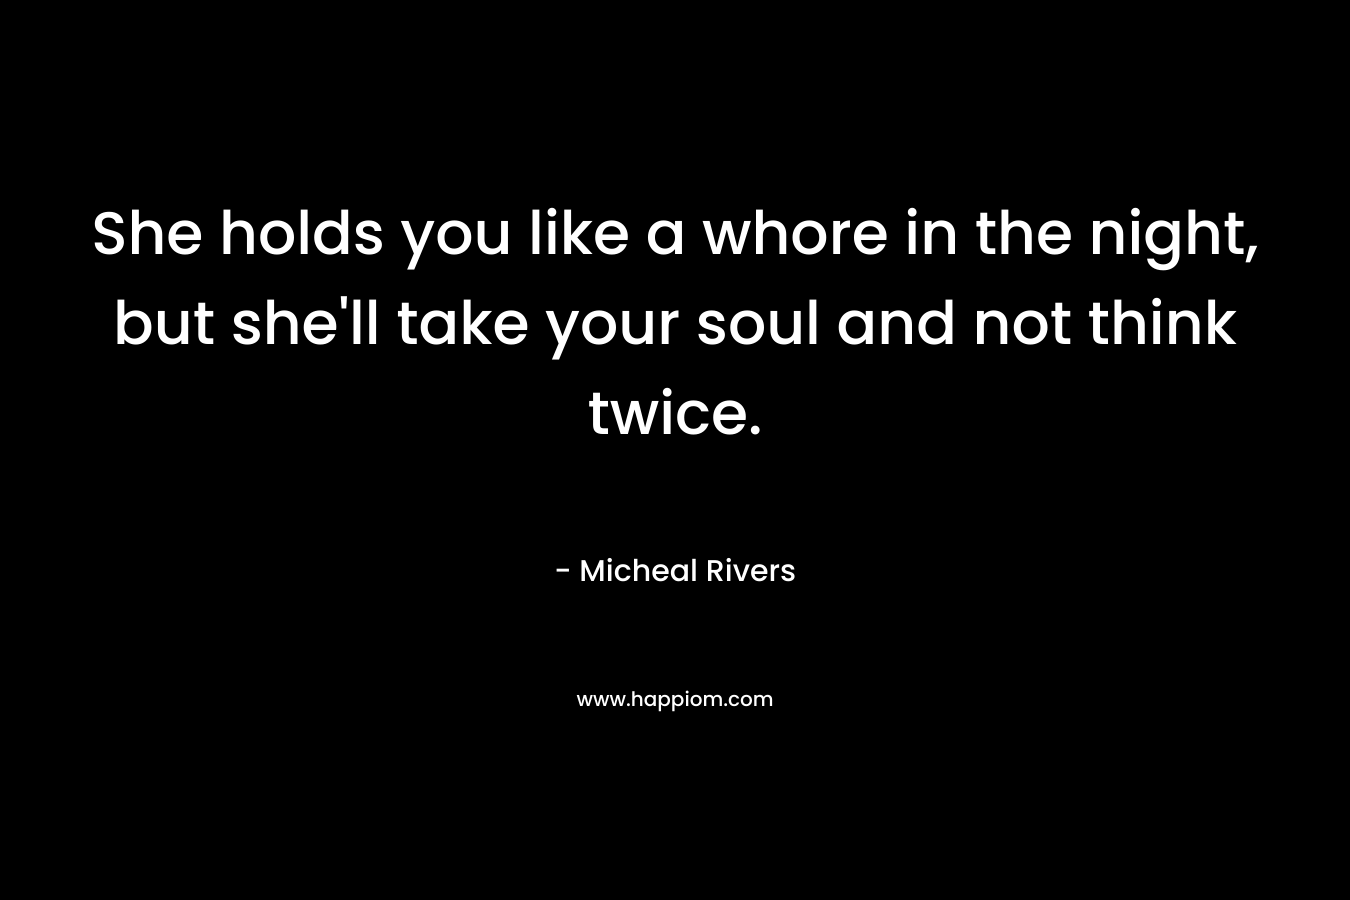 She holds you like a whore in the night, but she’ll take your soul and not think twice. – Micheal Rivers